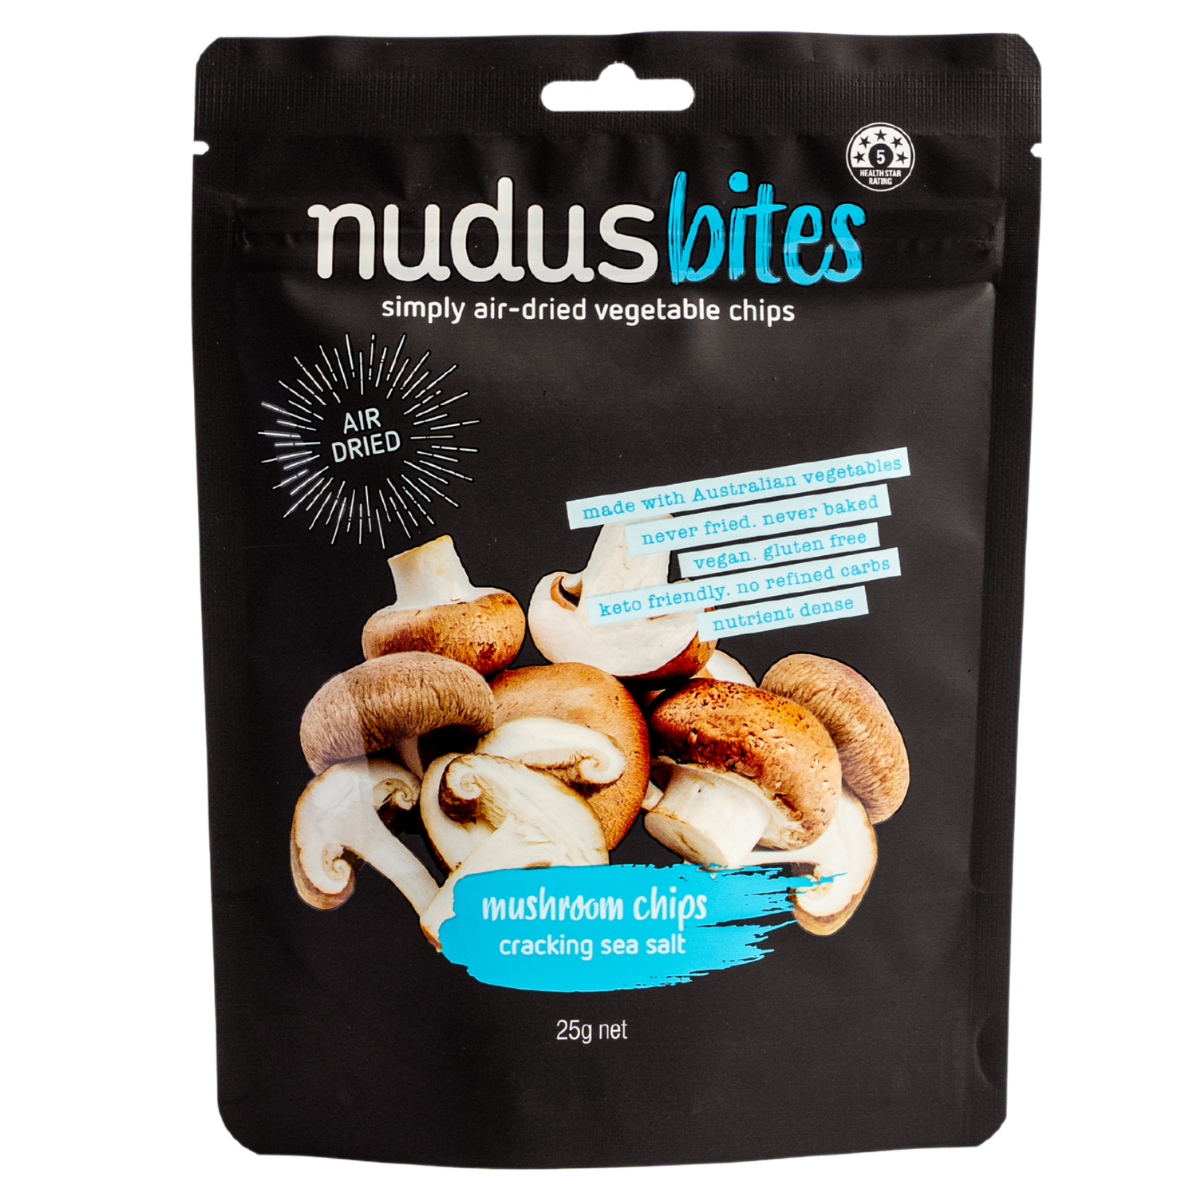 Our Favourites From Nudus Bites Floret Chips